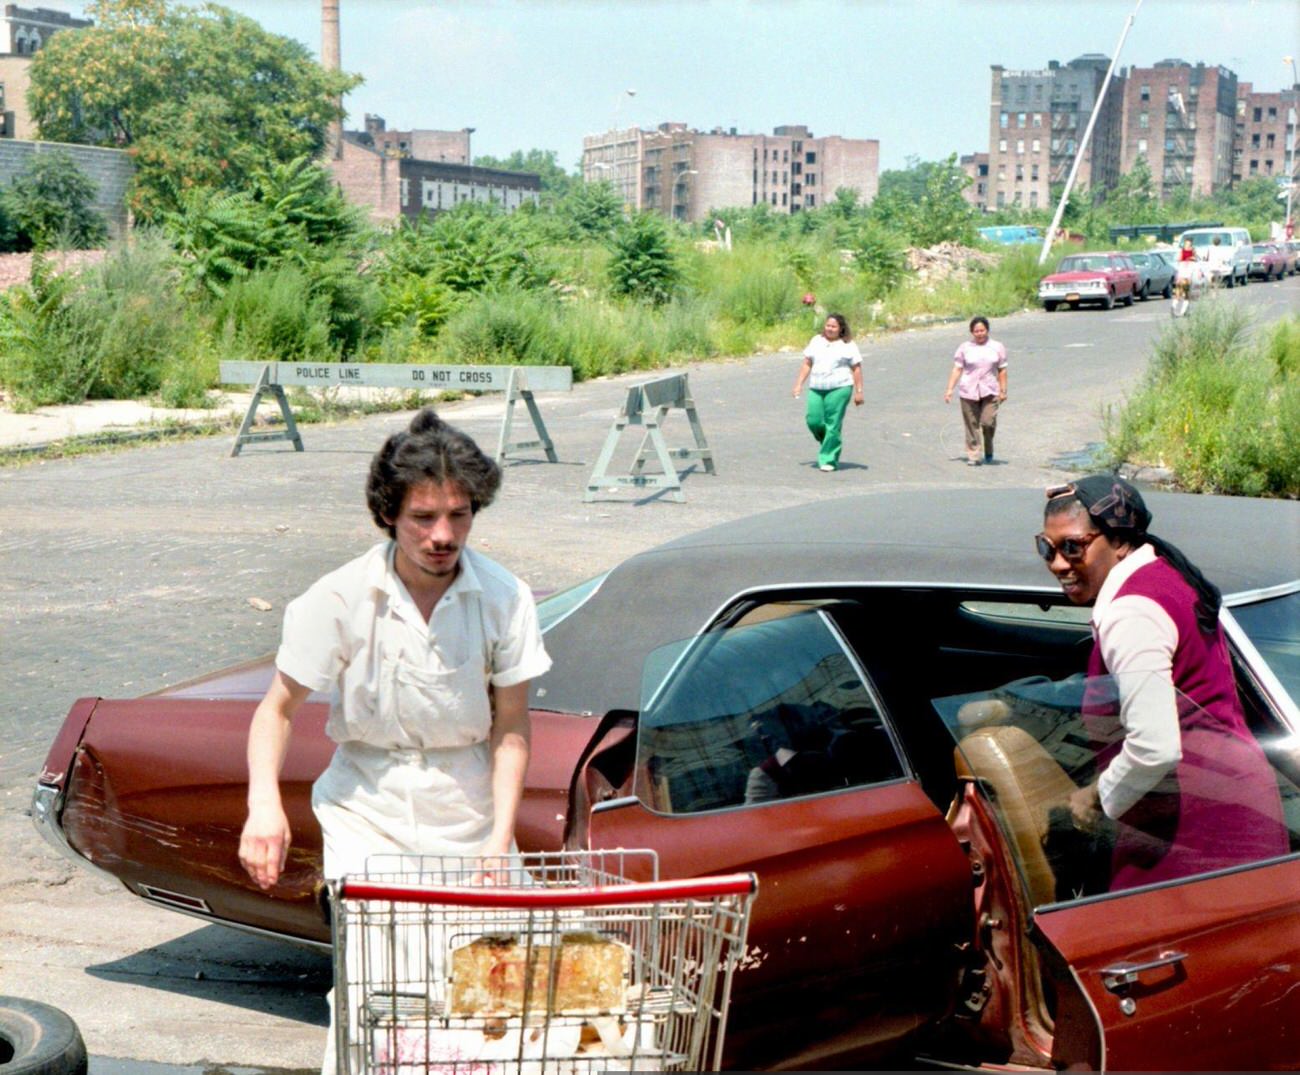 A Shop Worker Helps A Woman Load Groceries Into A Car In The South Bronx, August 1980.